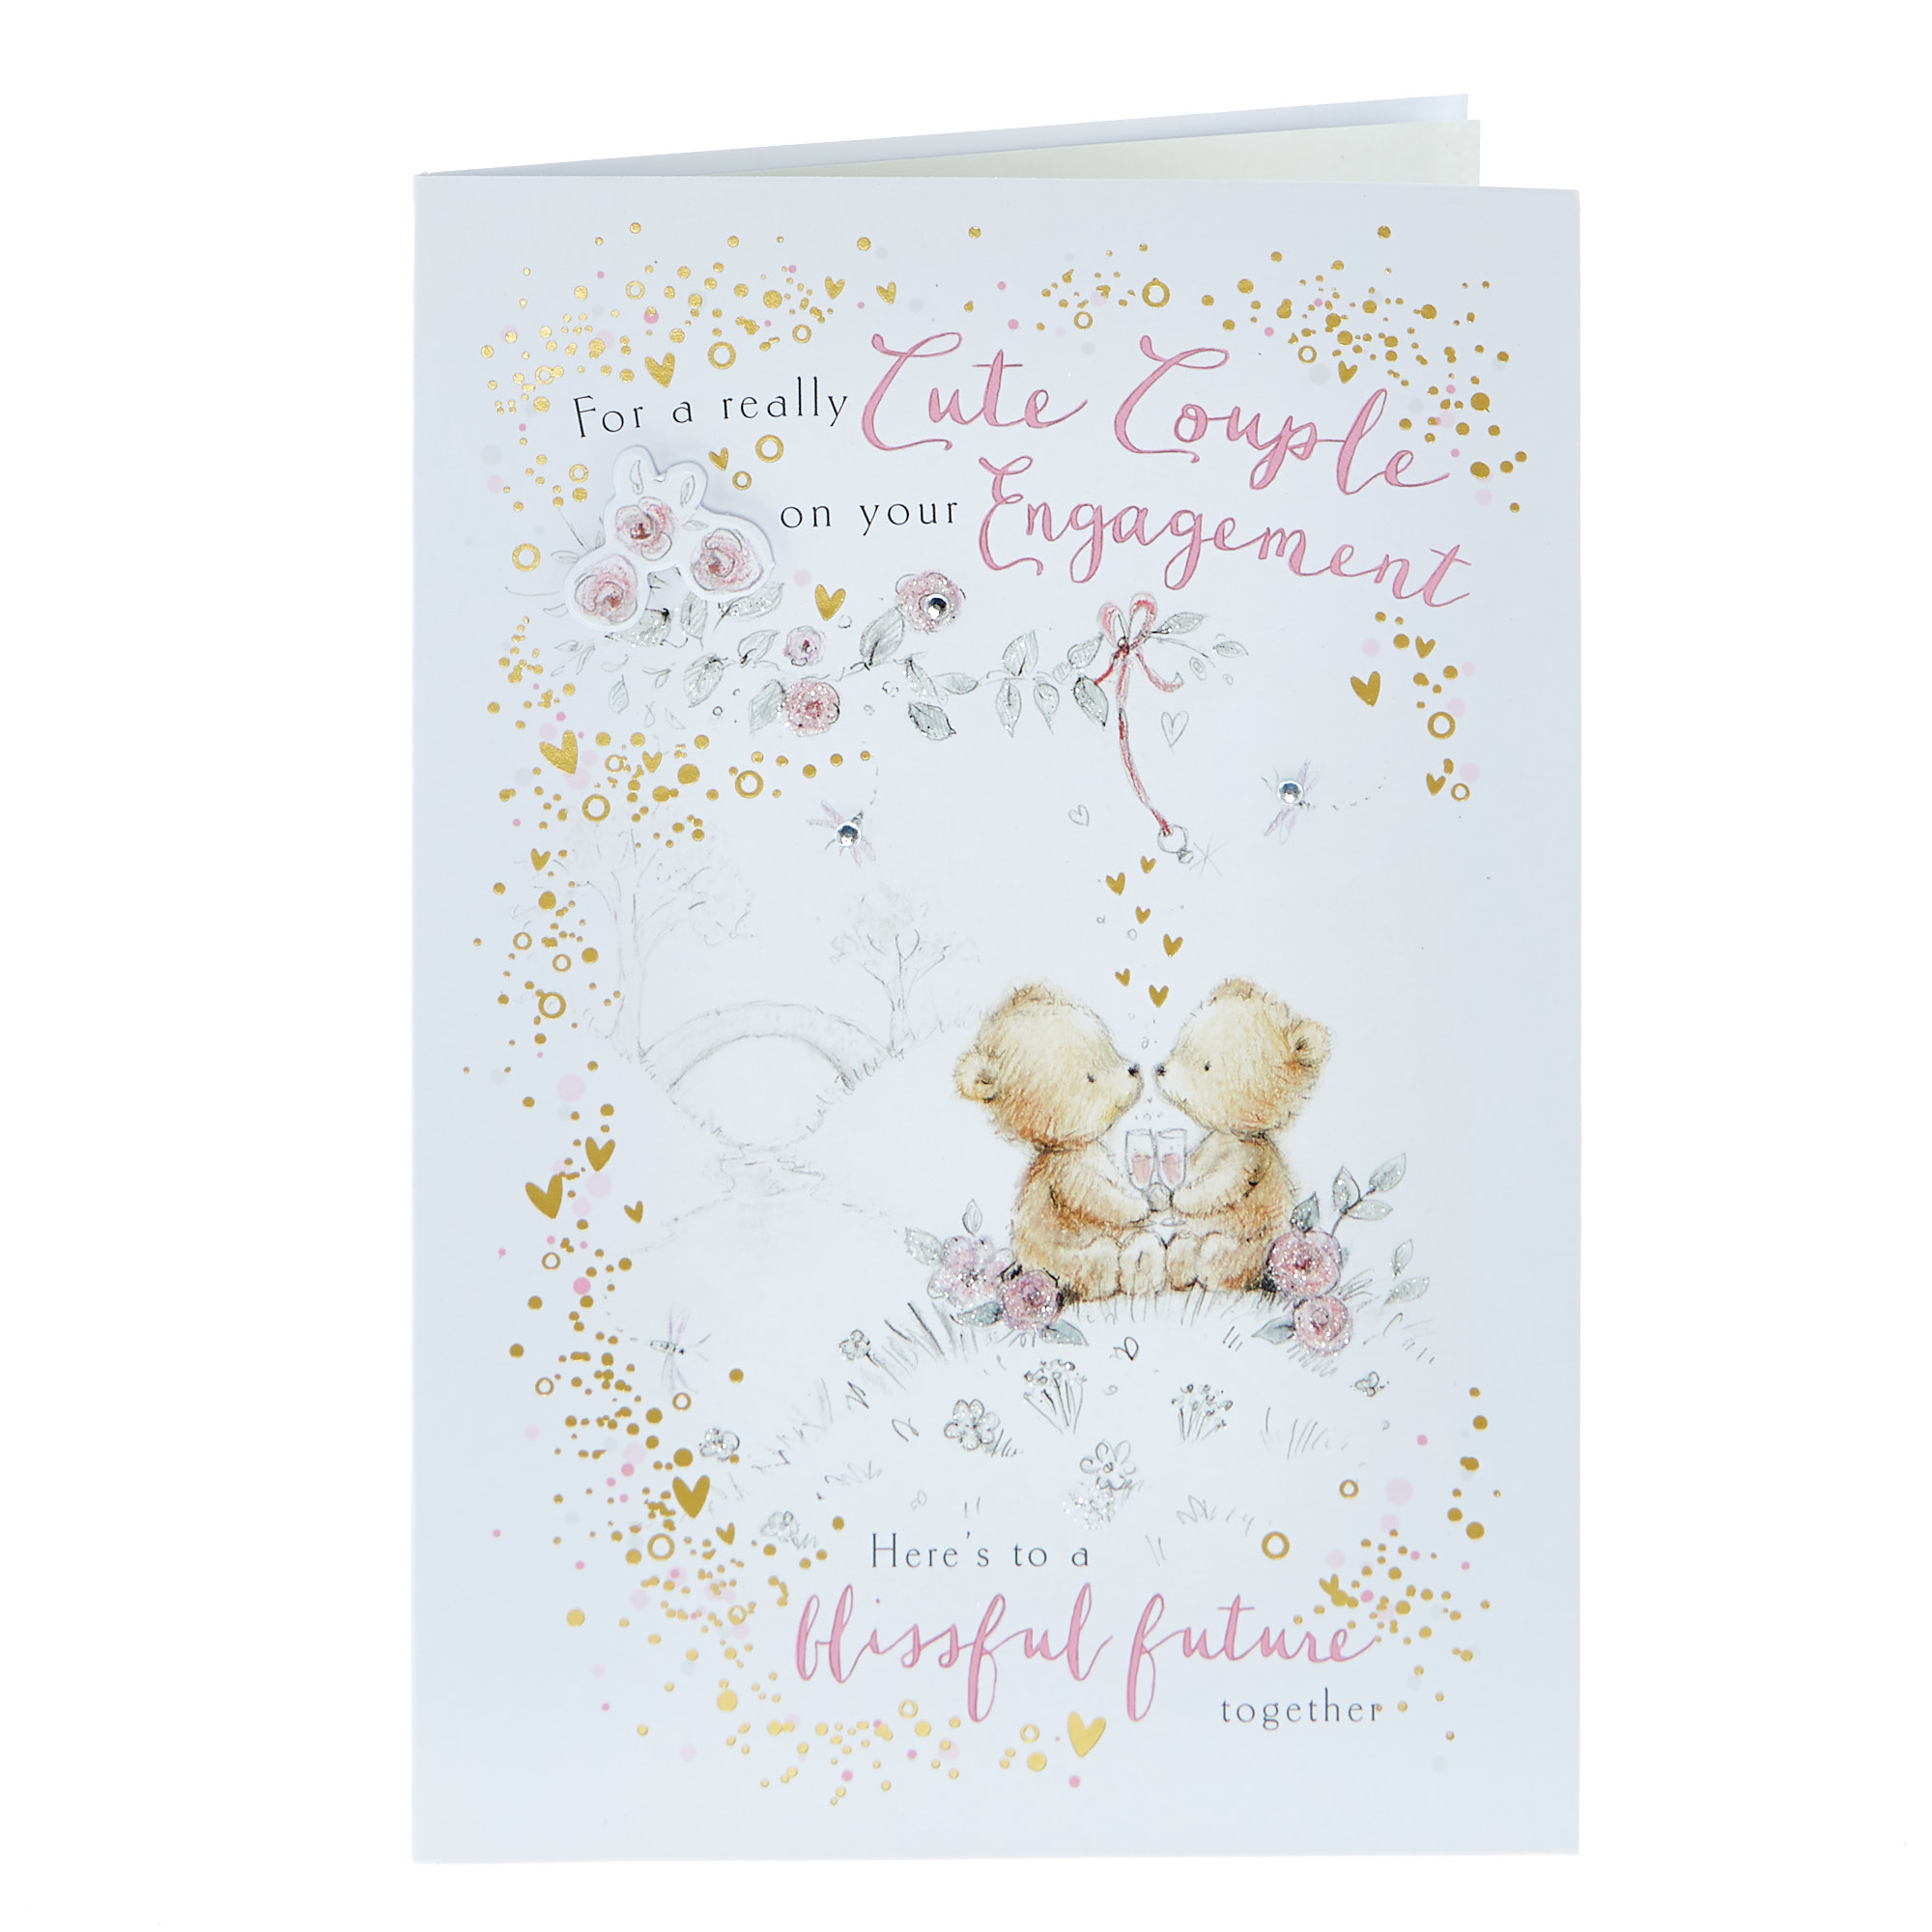 Engagement Card - For A Really Cute Couple 